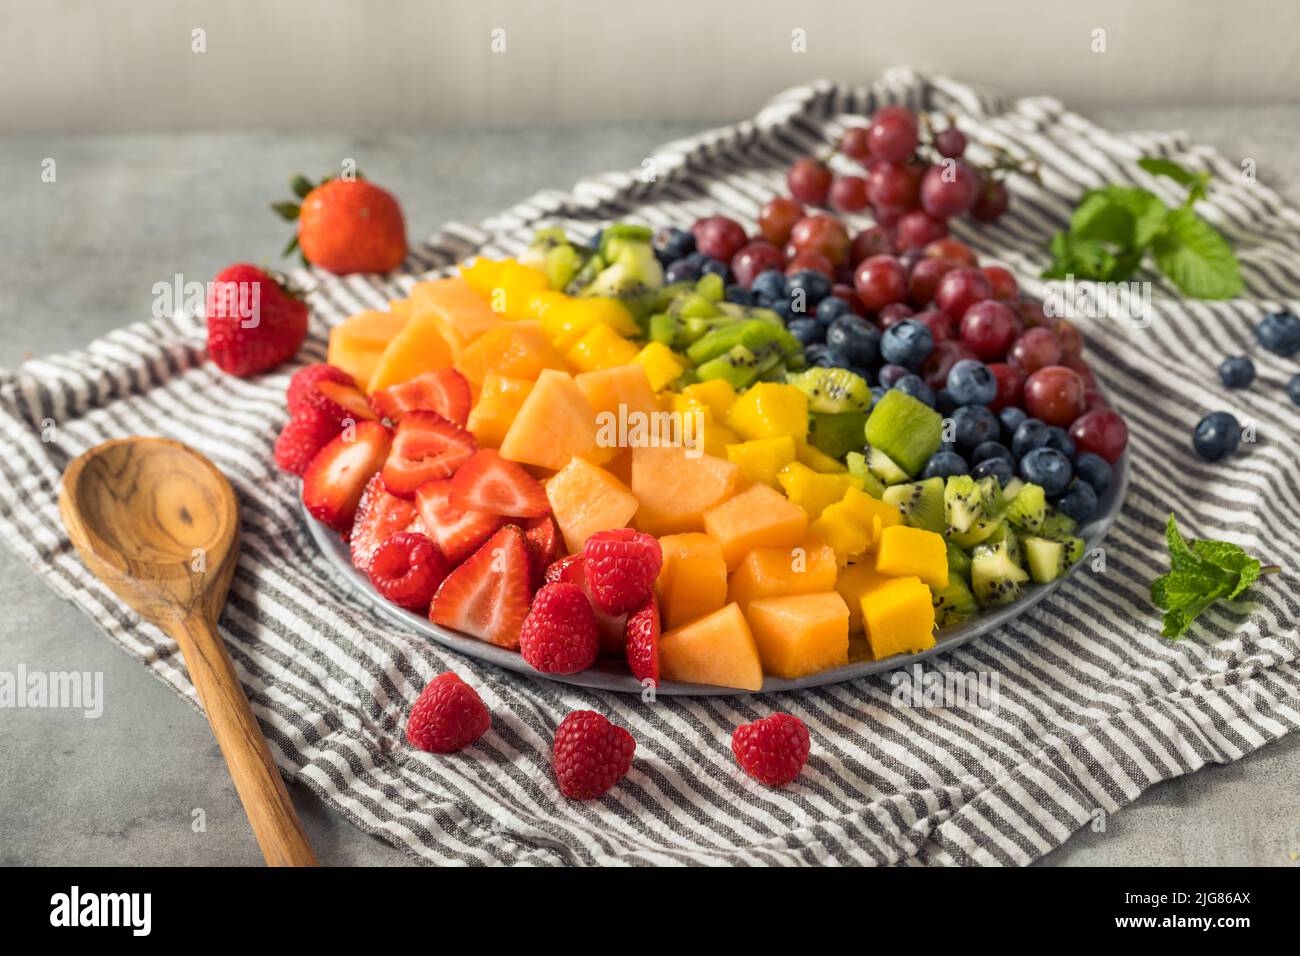 Raw Organic Rainbow Fruit Salad with Berries Melons and Grapes Stock Photo